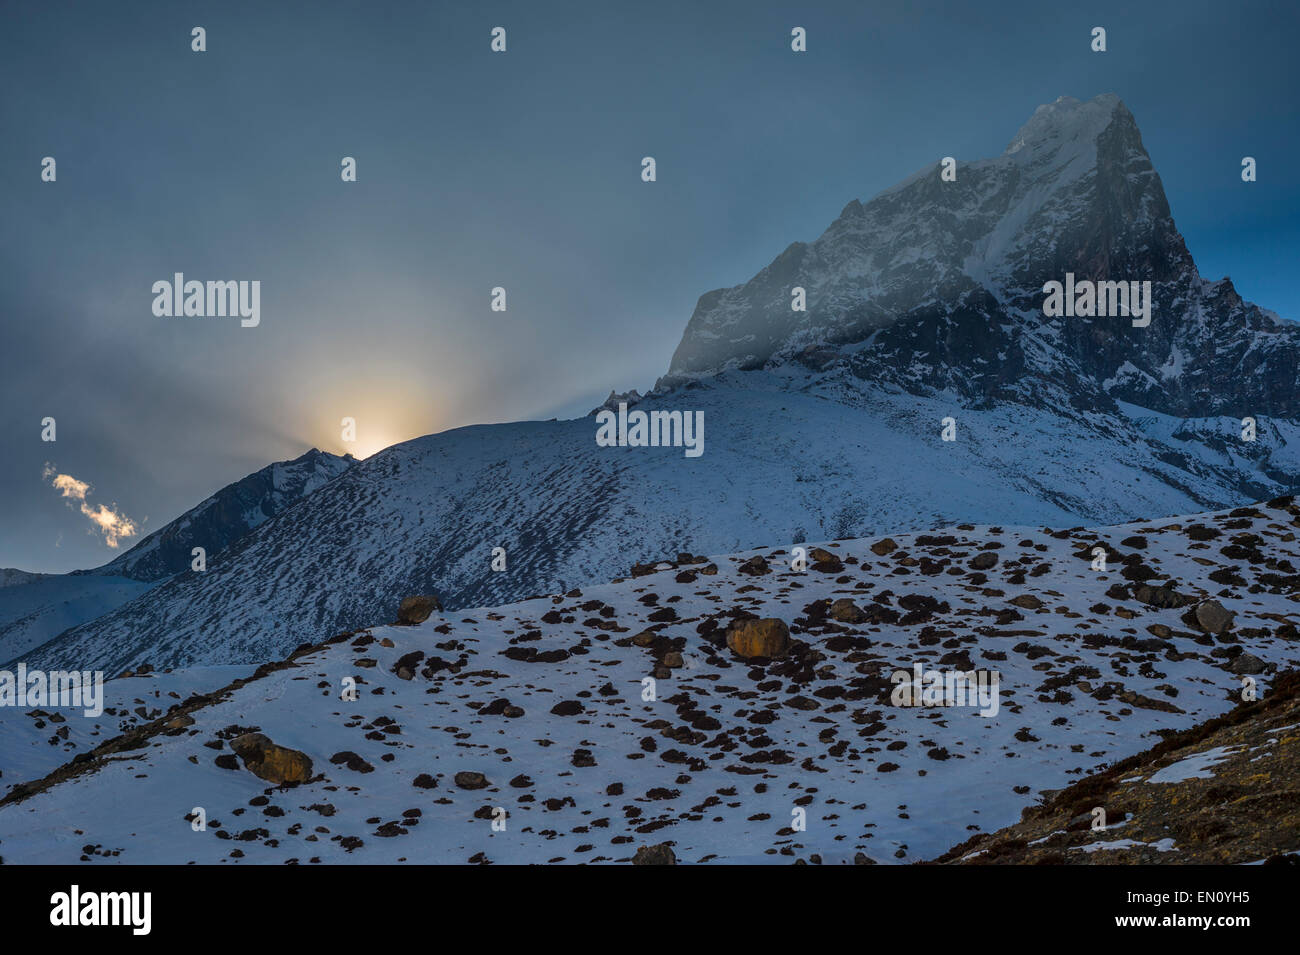 View of Taboche peak at sunset, with the sun disappearing behind the mountain, in Nepal Stock Photo